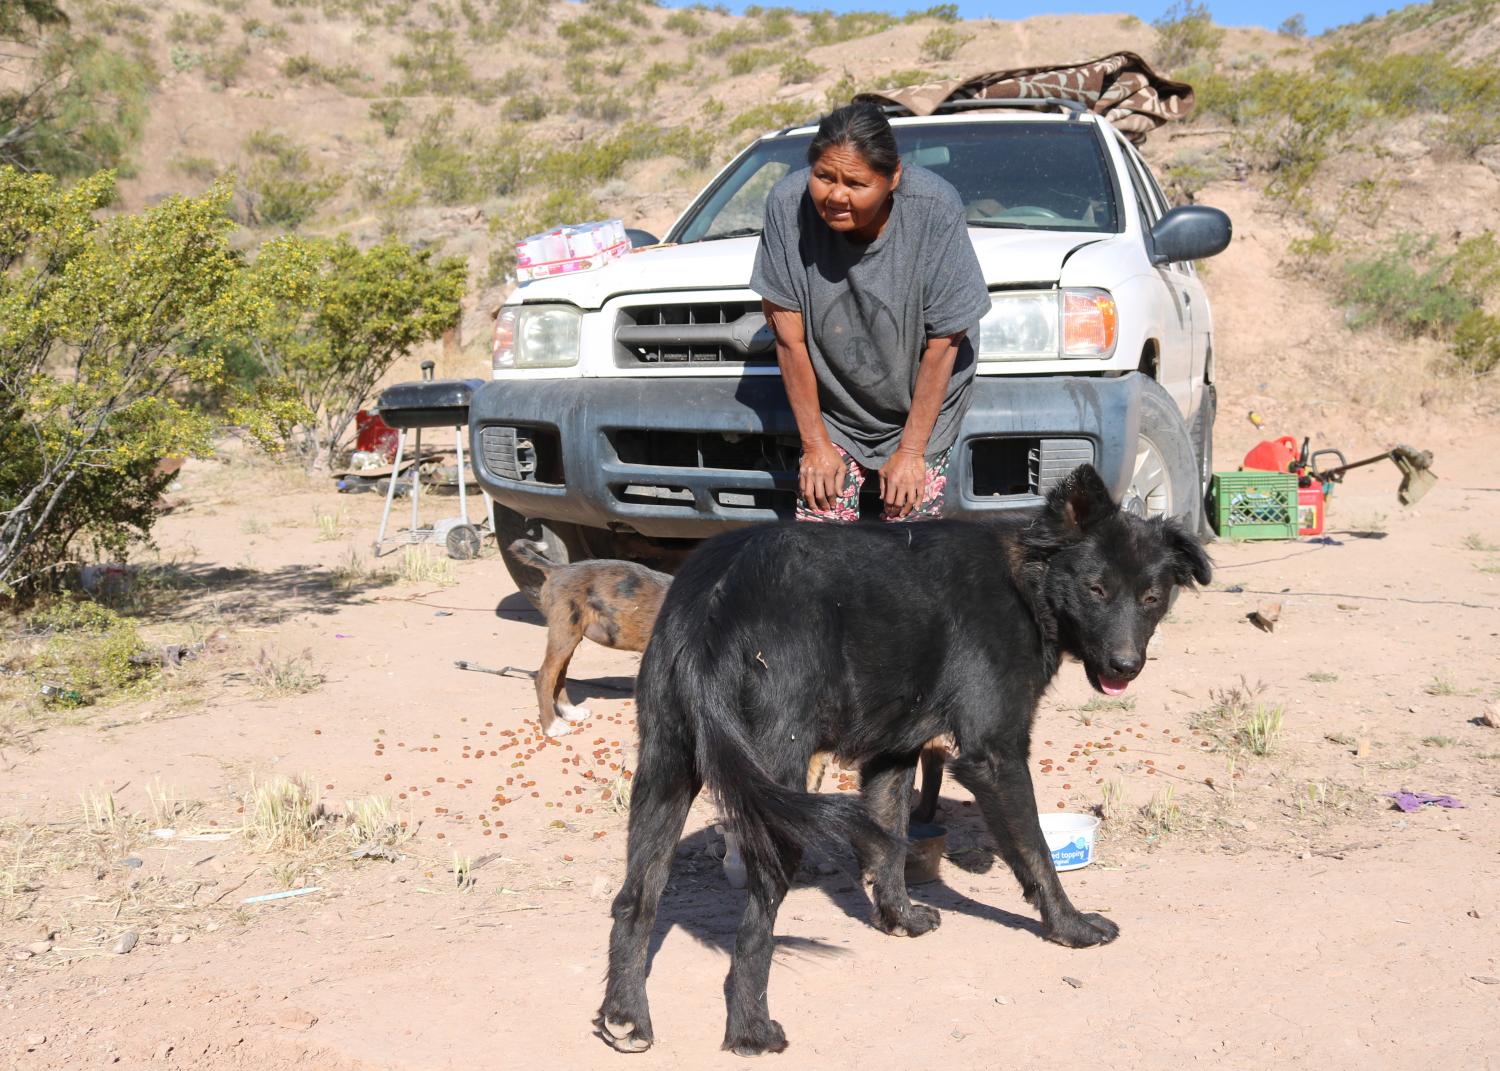 The Geronimo Animal Rescue Team is trying to save pets, strays on the San Carlos Apache Reservation